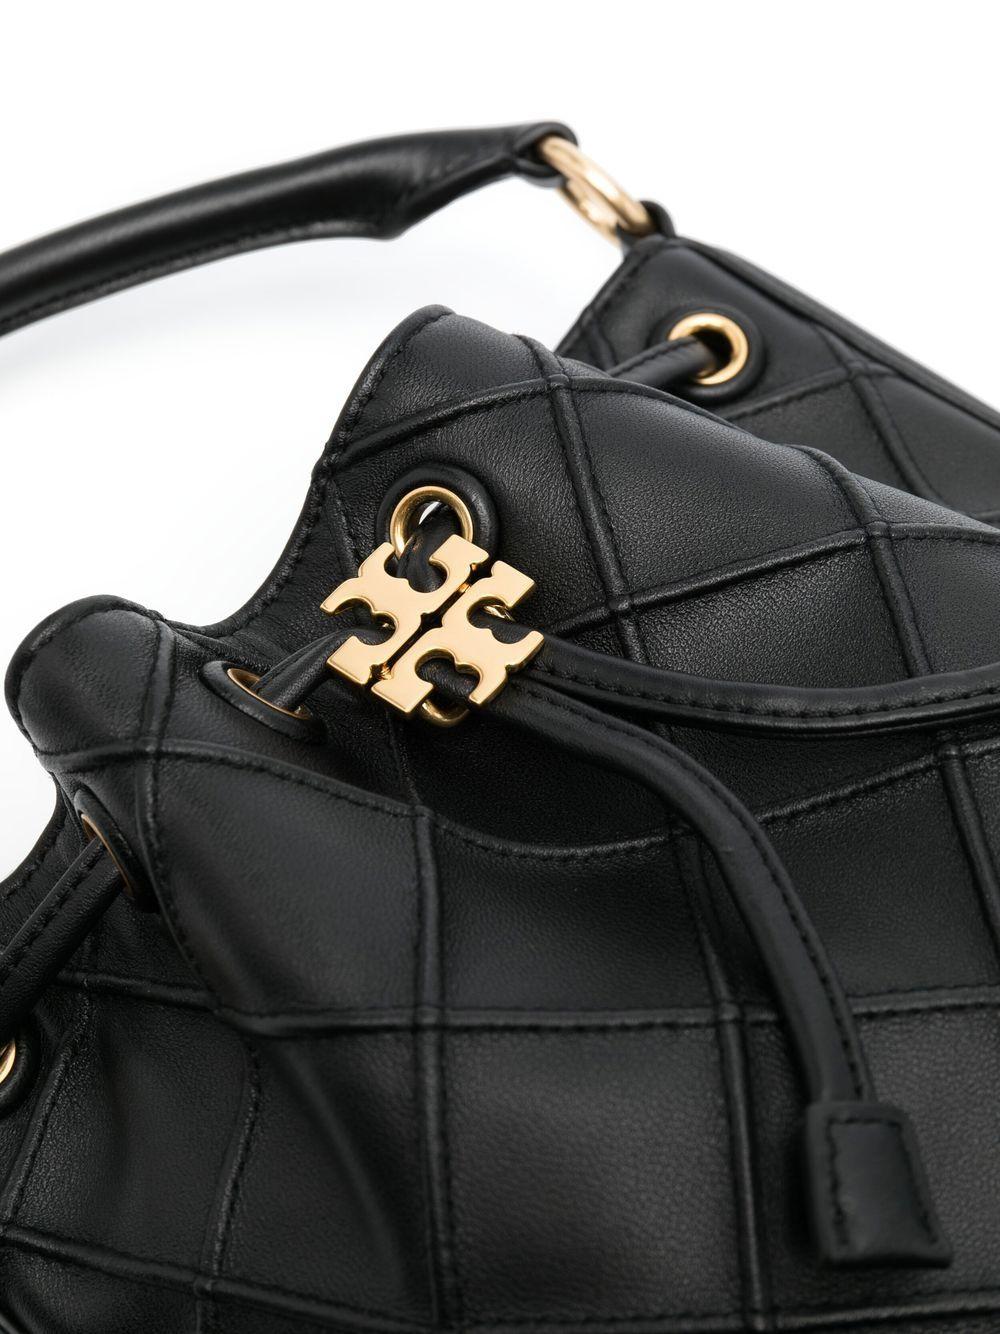 Tory Burch Fleming Large Soft Large Bucket Bag - Black - Monkee's of the  Pines